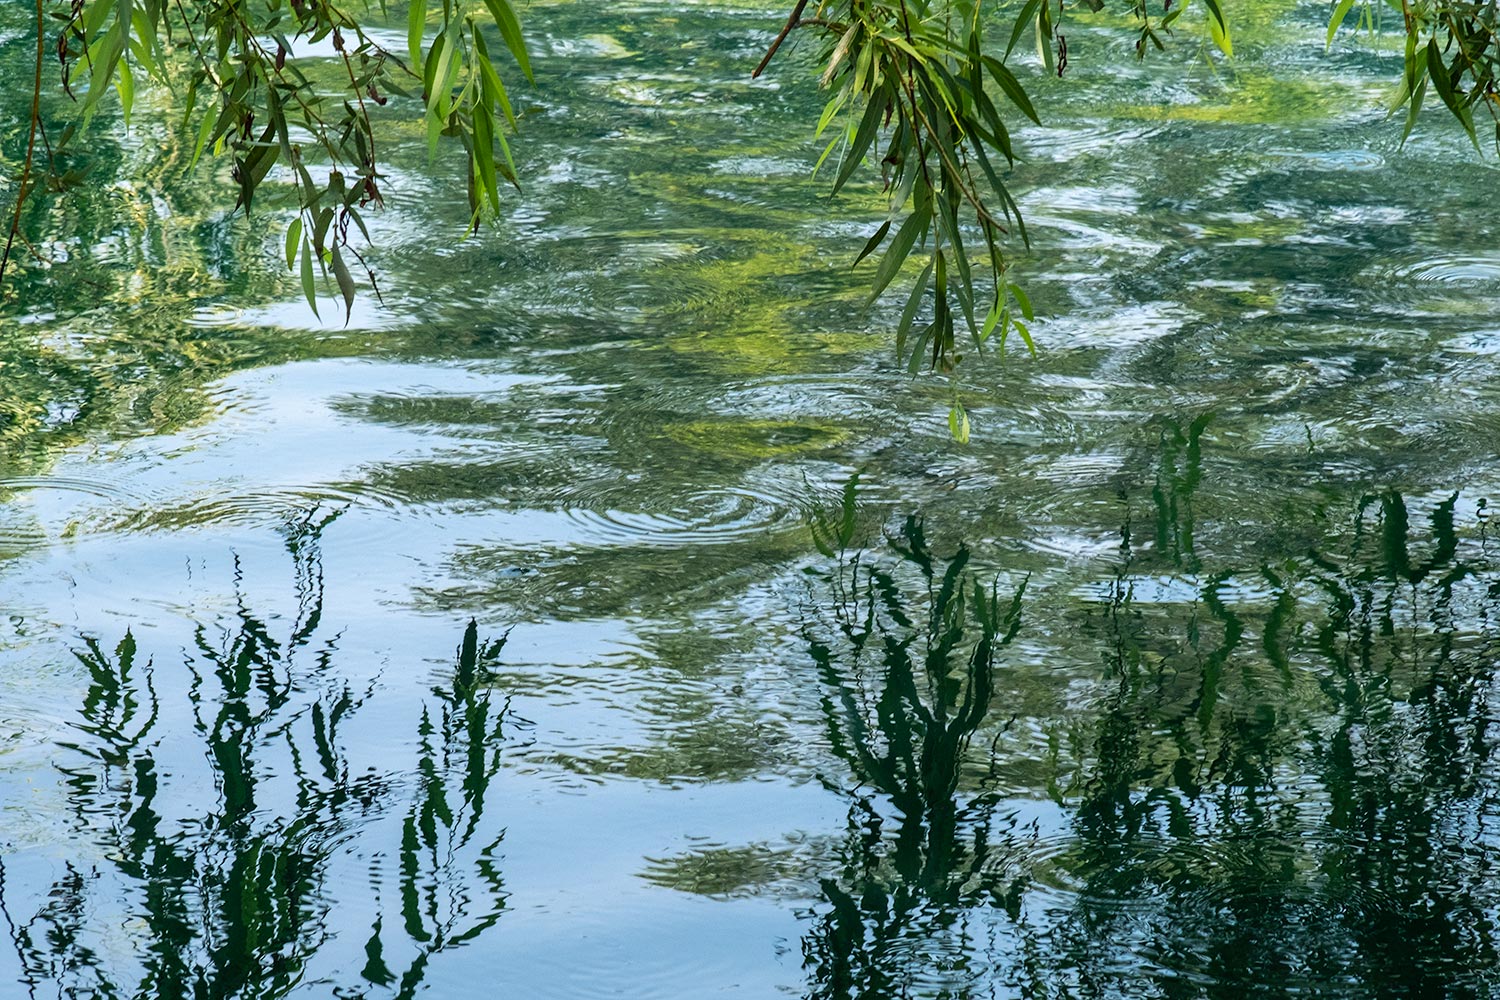 Reflections of branches and leaves on the gently rippling waters of the lake at Chateau Monetelena Winery, Napa Valley, USA